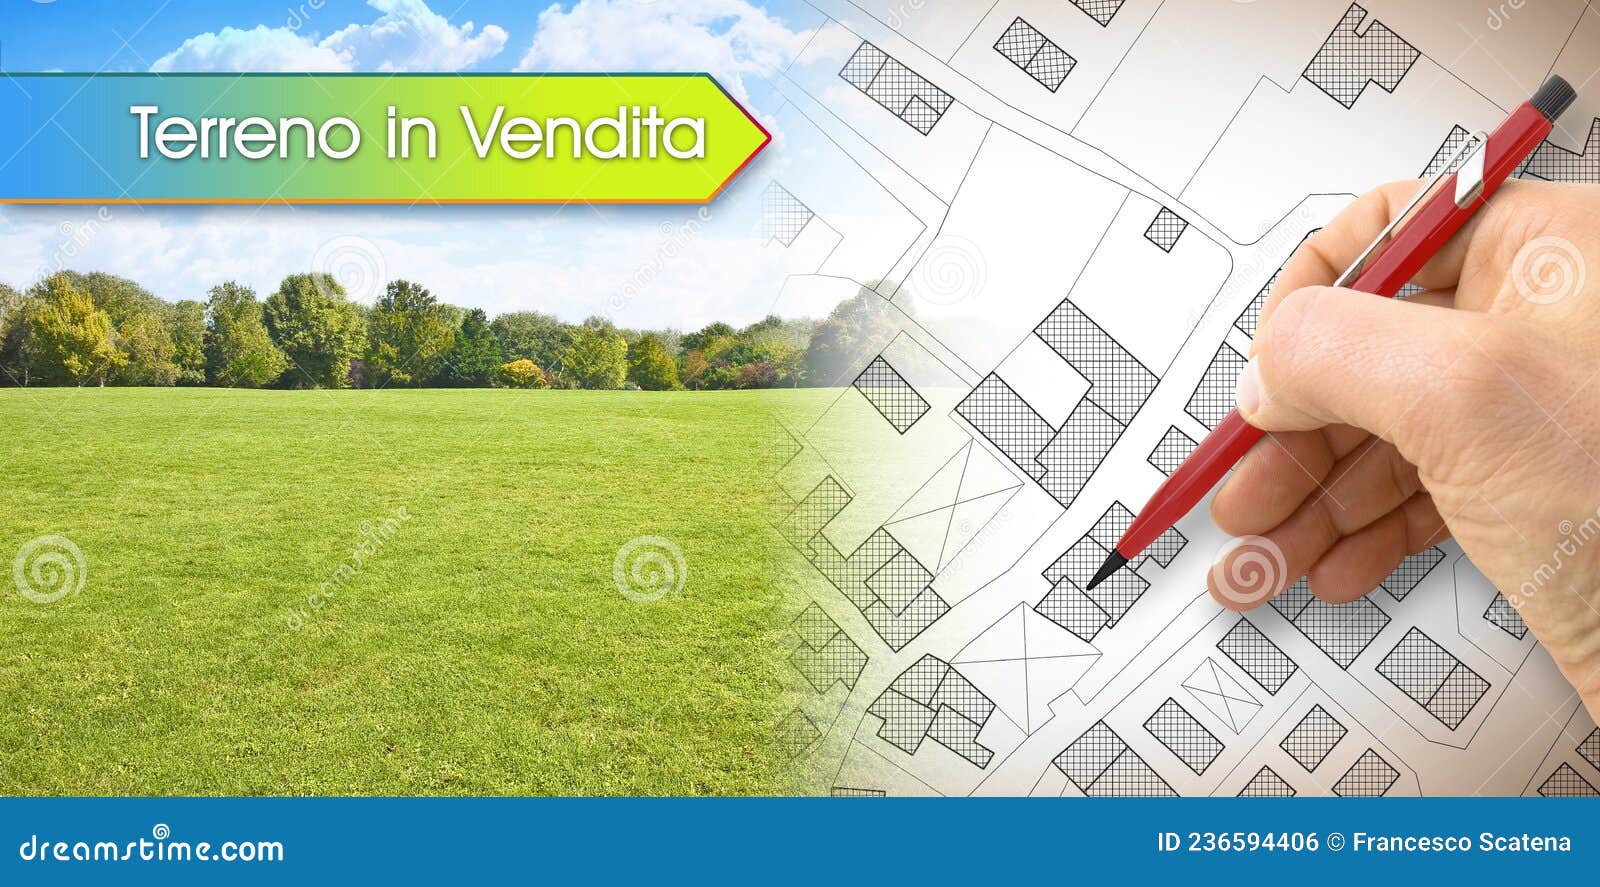 land for sale, in italian language terreno in vendita, concept with architect drawing an imaginary cadastral map of territory with